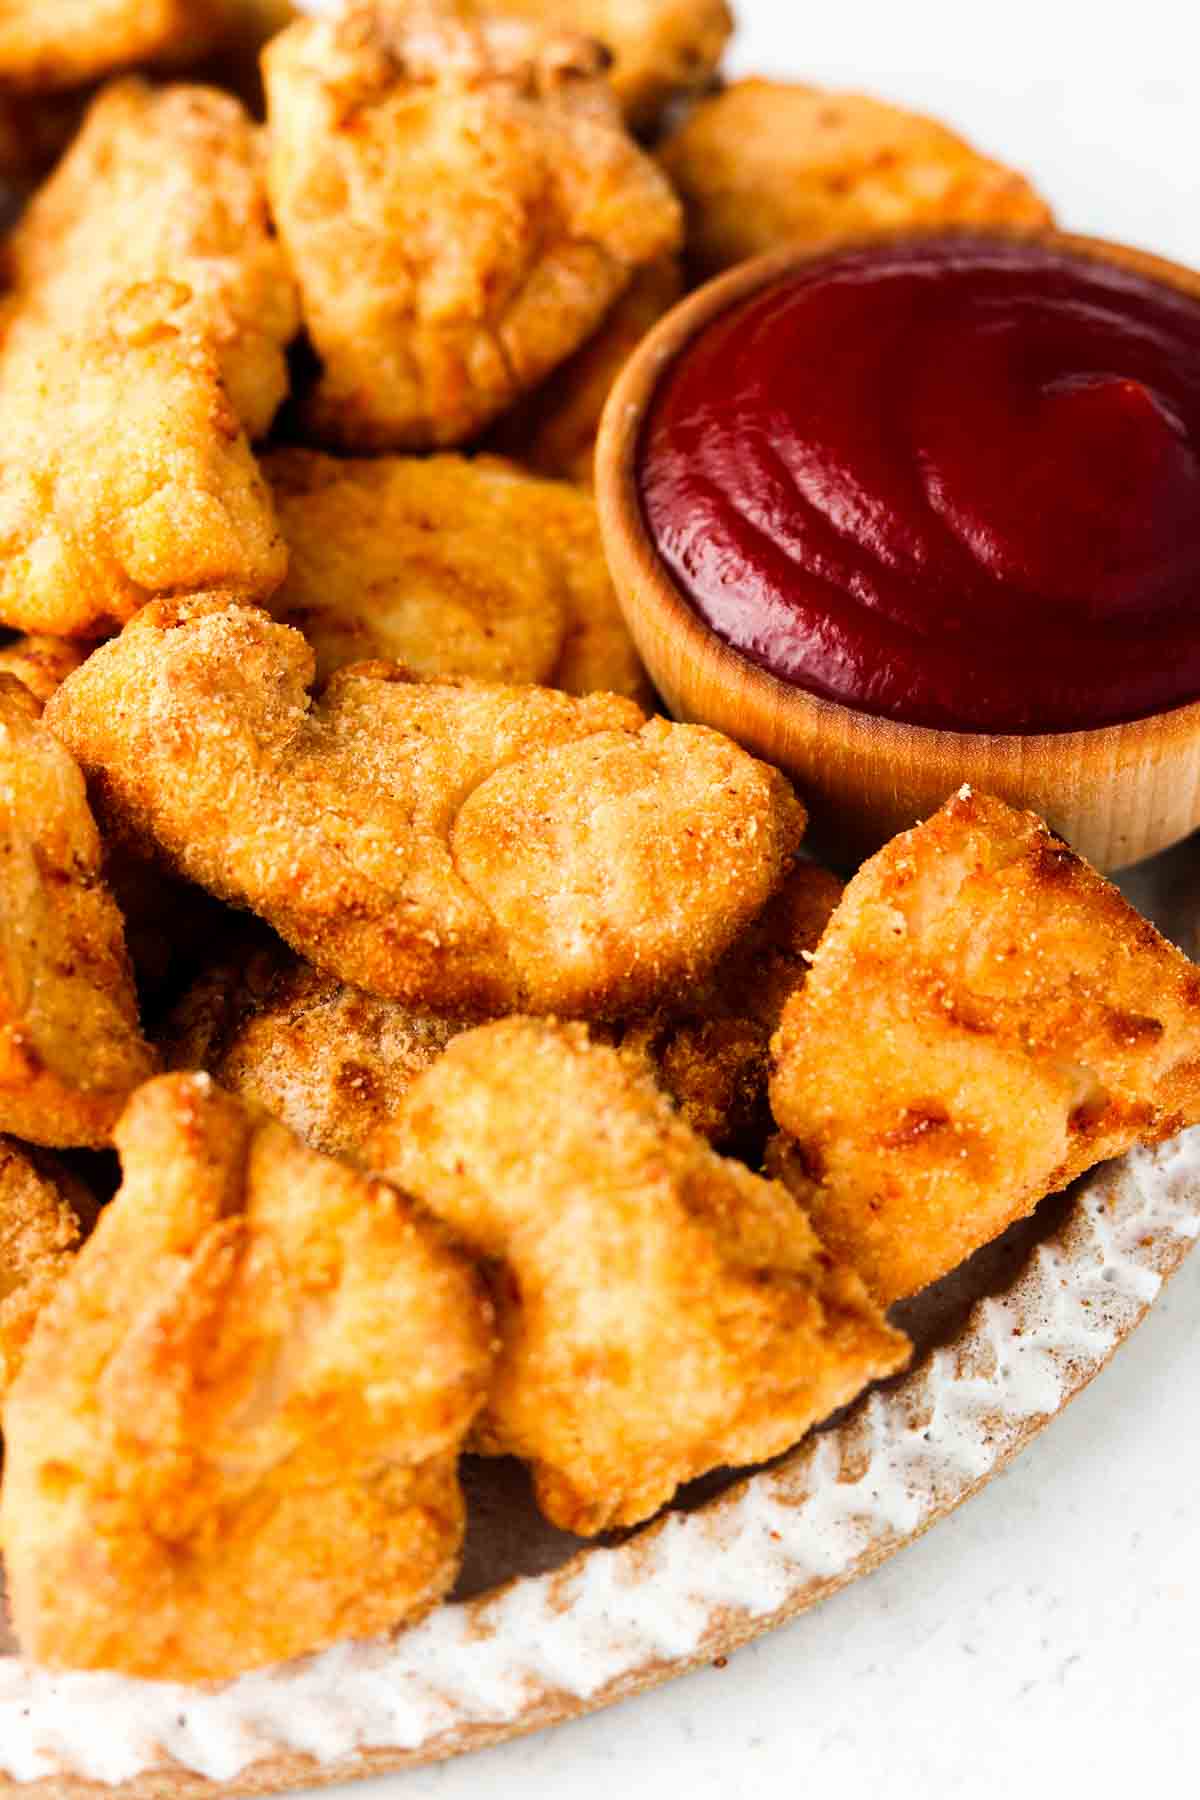 Crispy chicken nuggets on a plate with a small wooden bowl of ketchup.